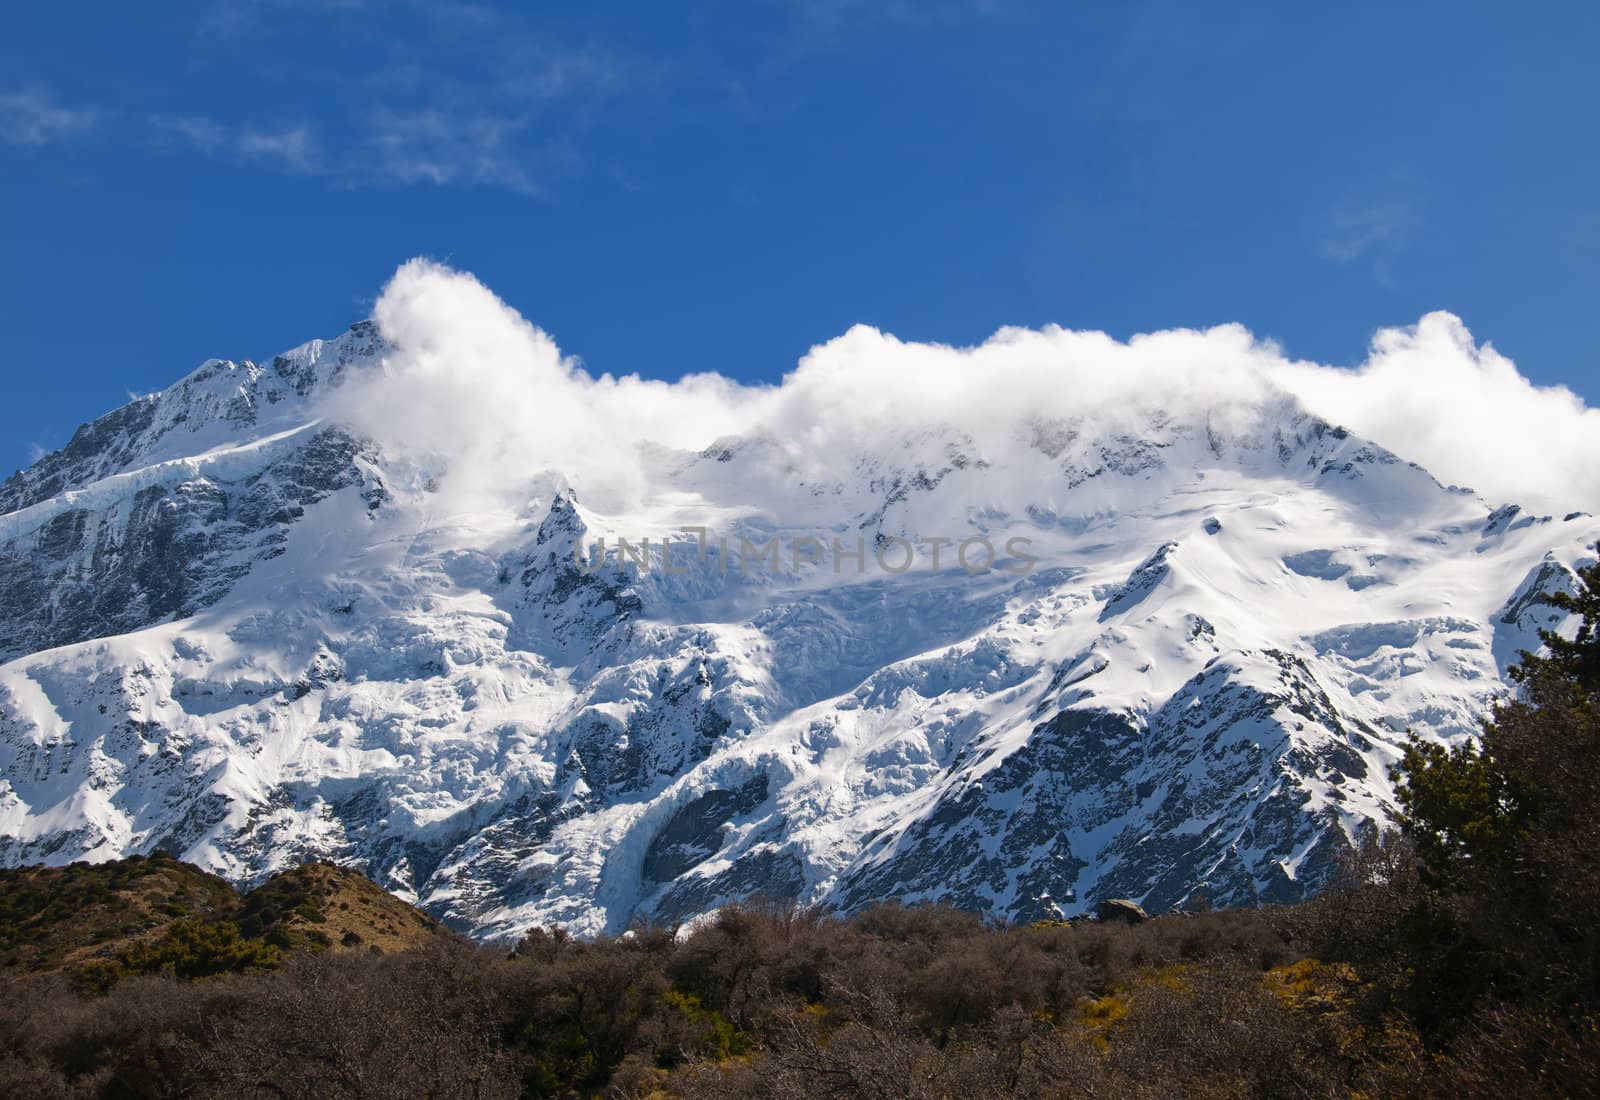 Mount Cook in New Zealand - Highest Mountain in NZ